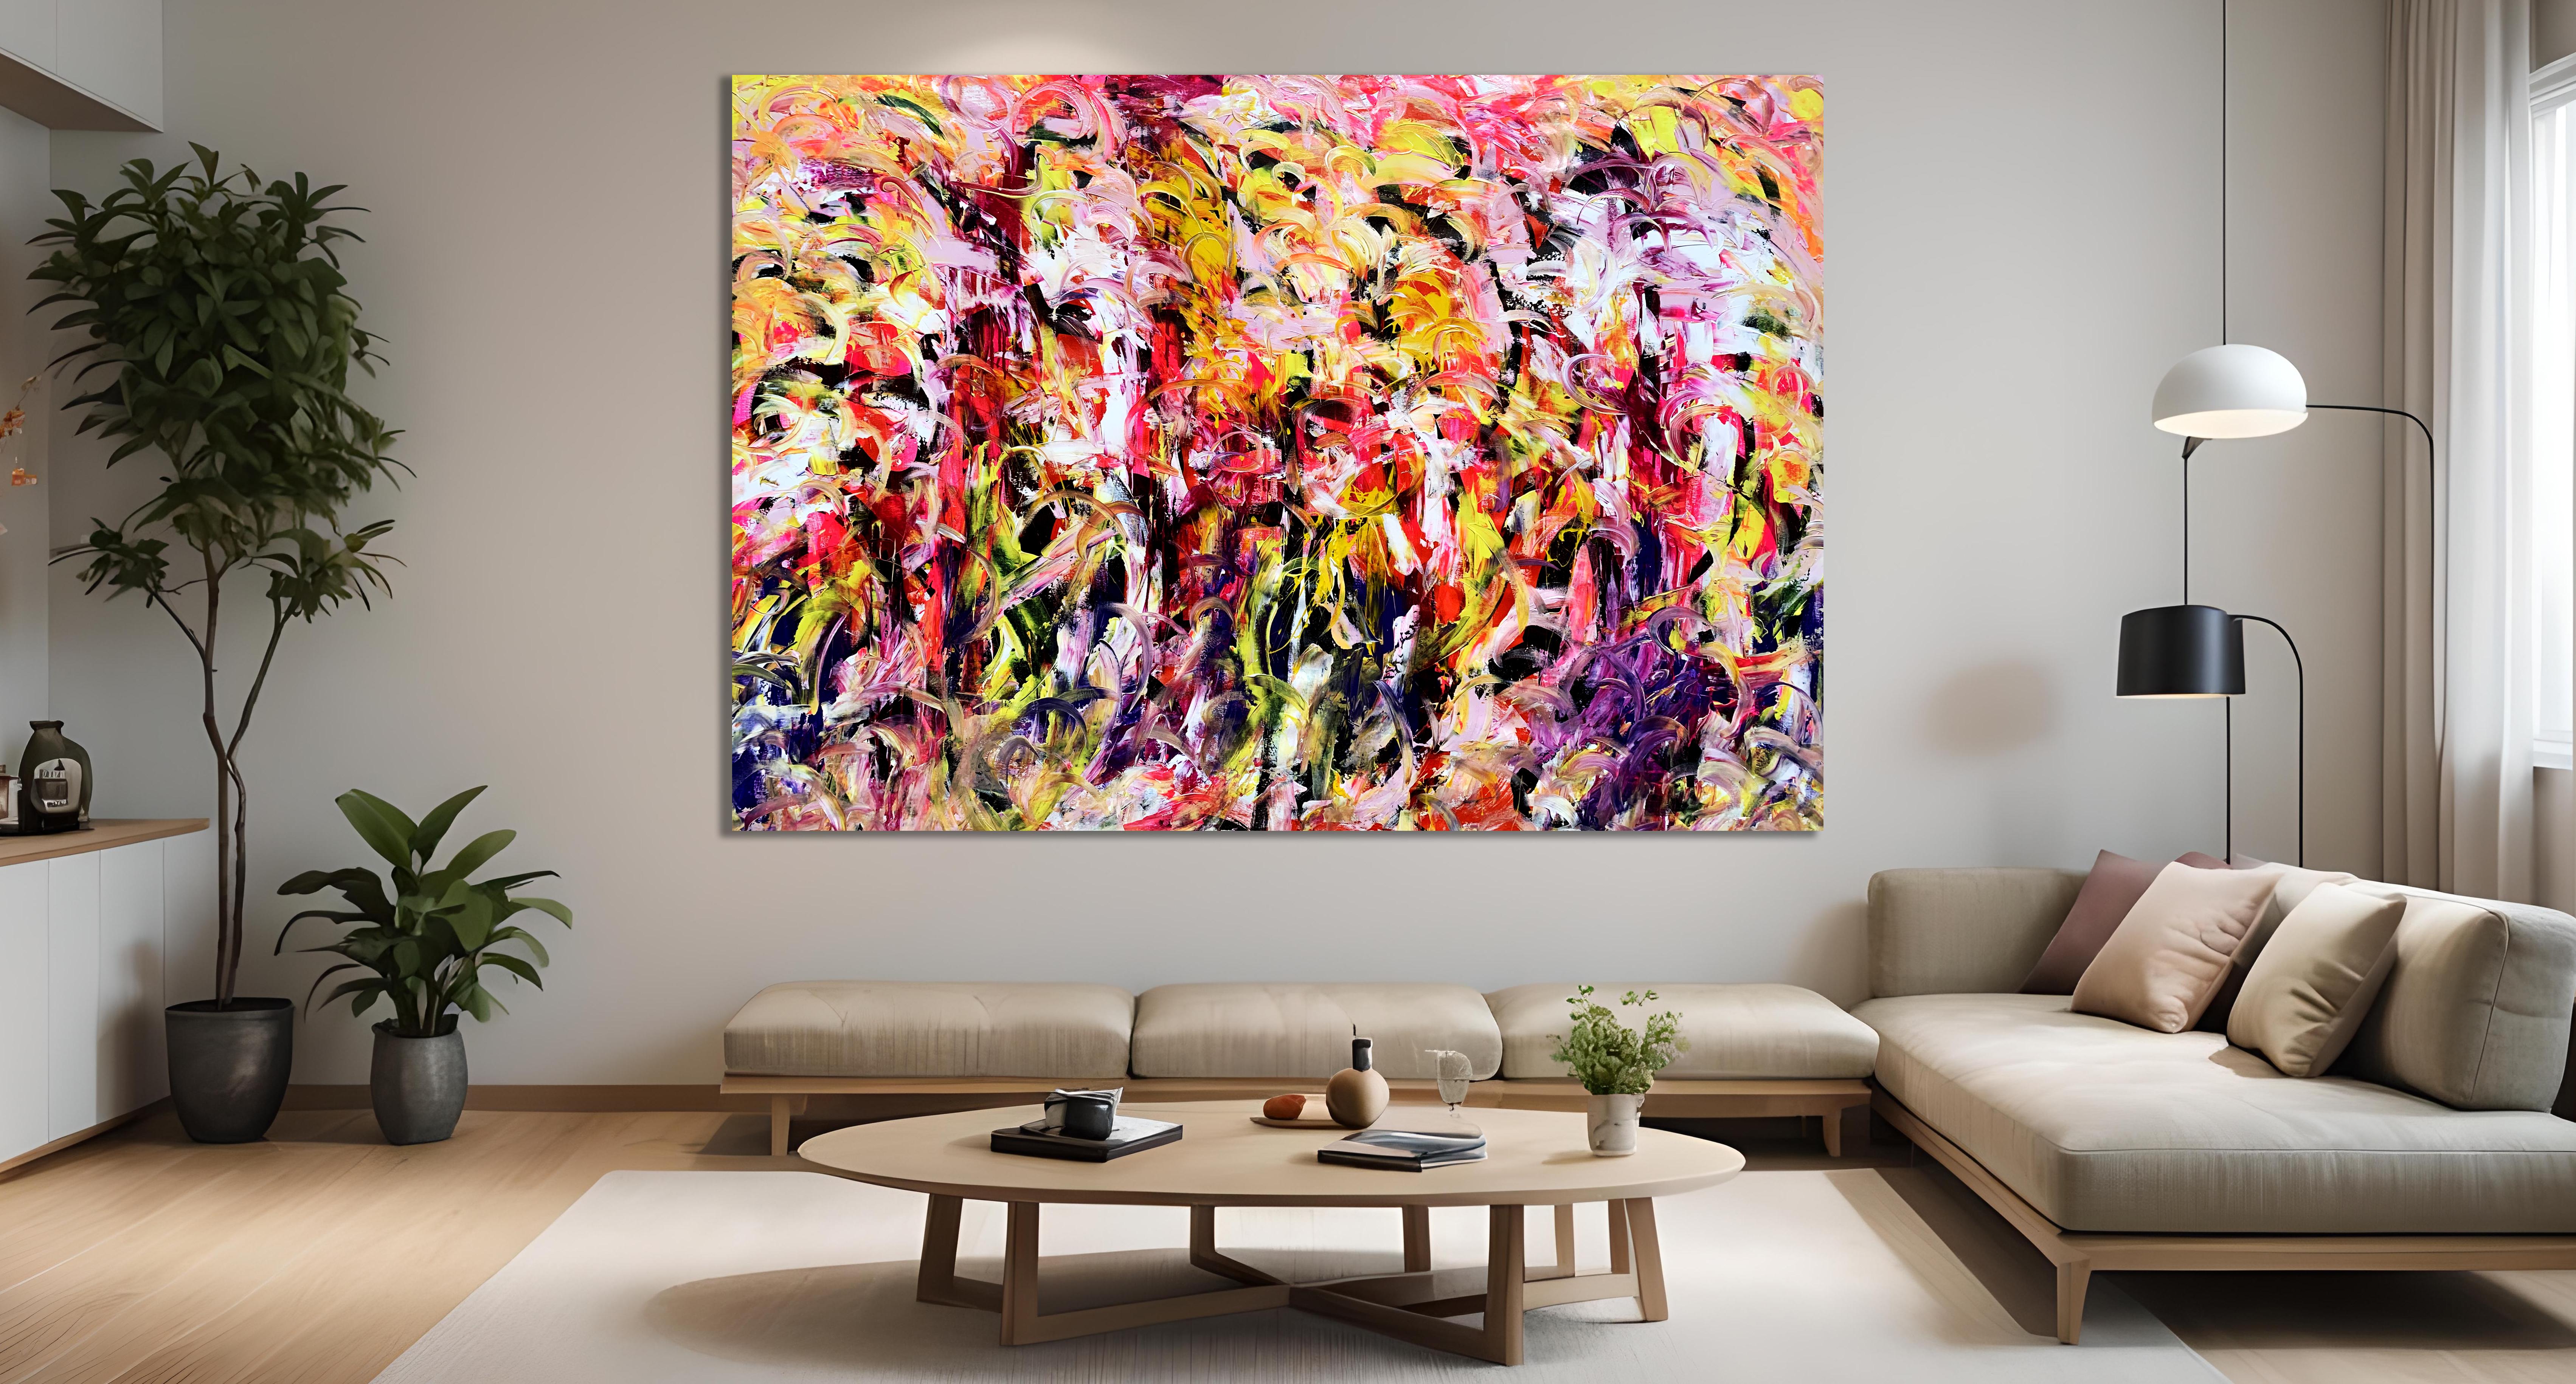 Nebulous Symbolism - Abstract Expressionist Painting by Estelle Asmodelle